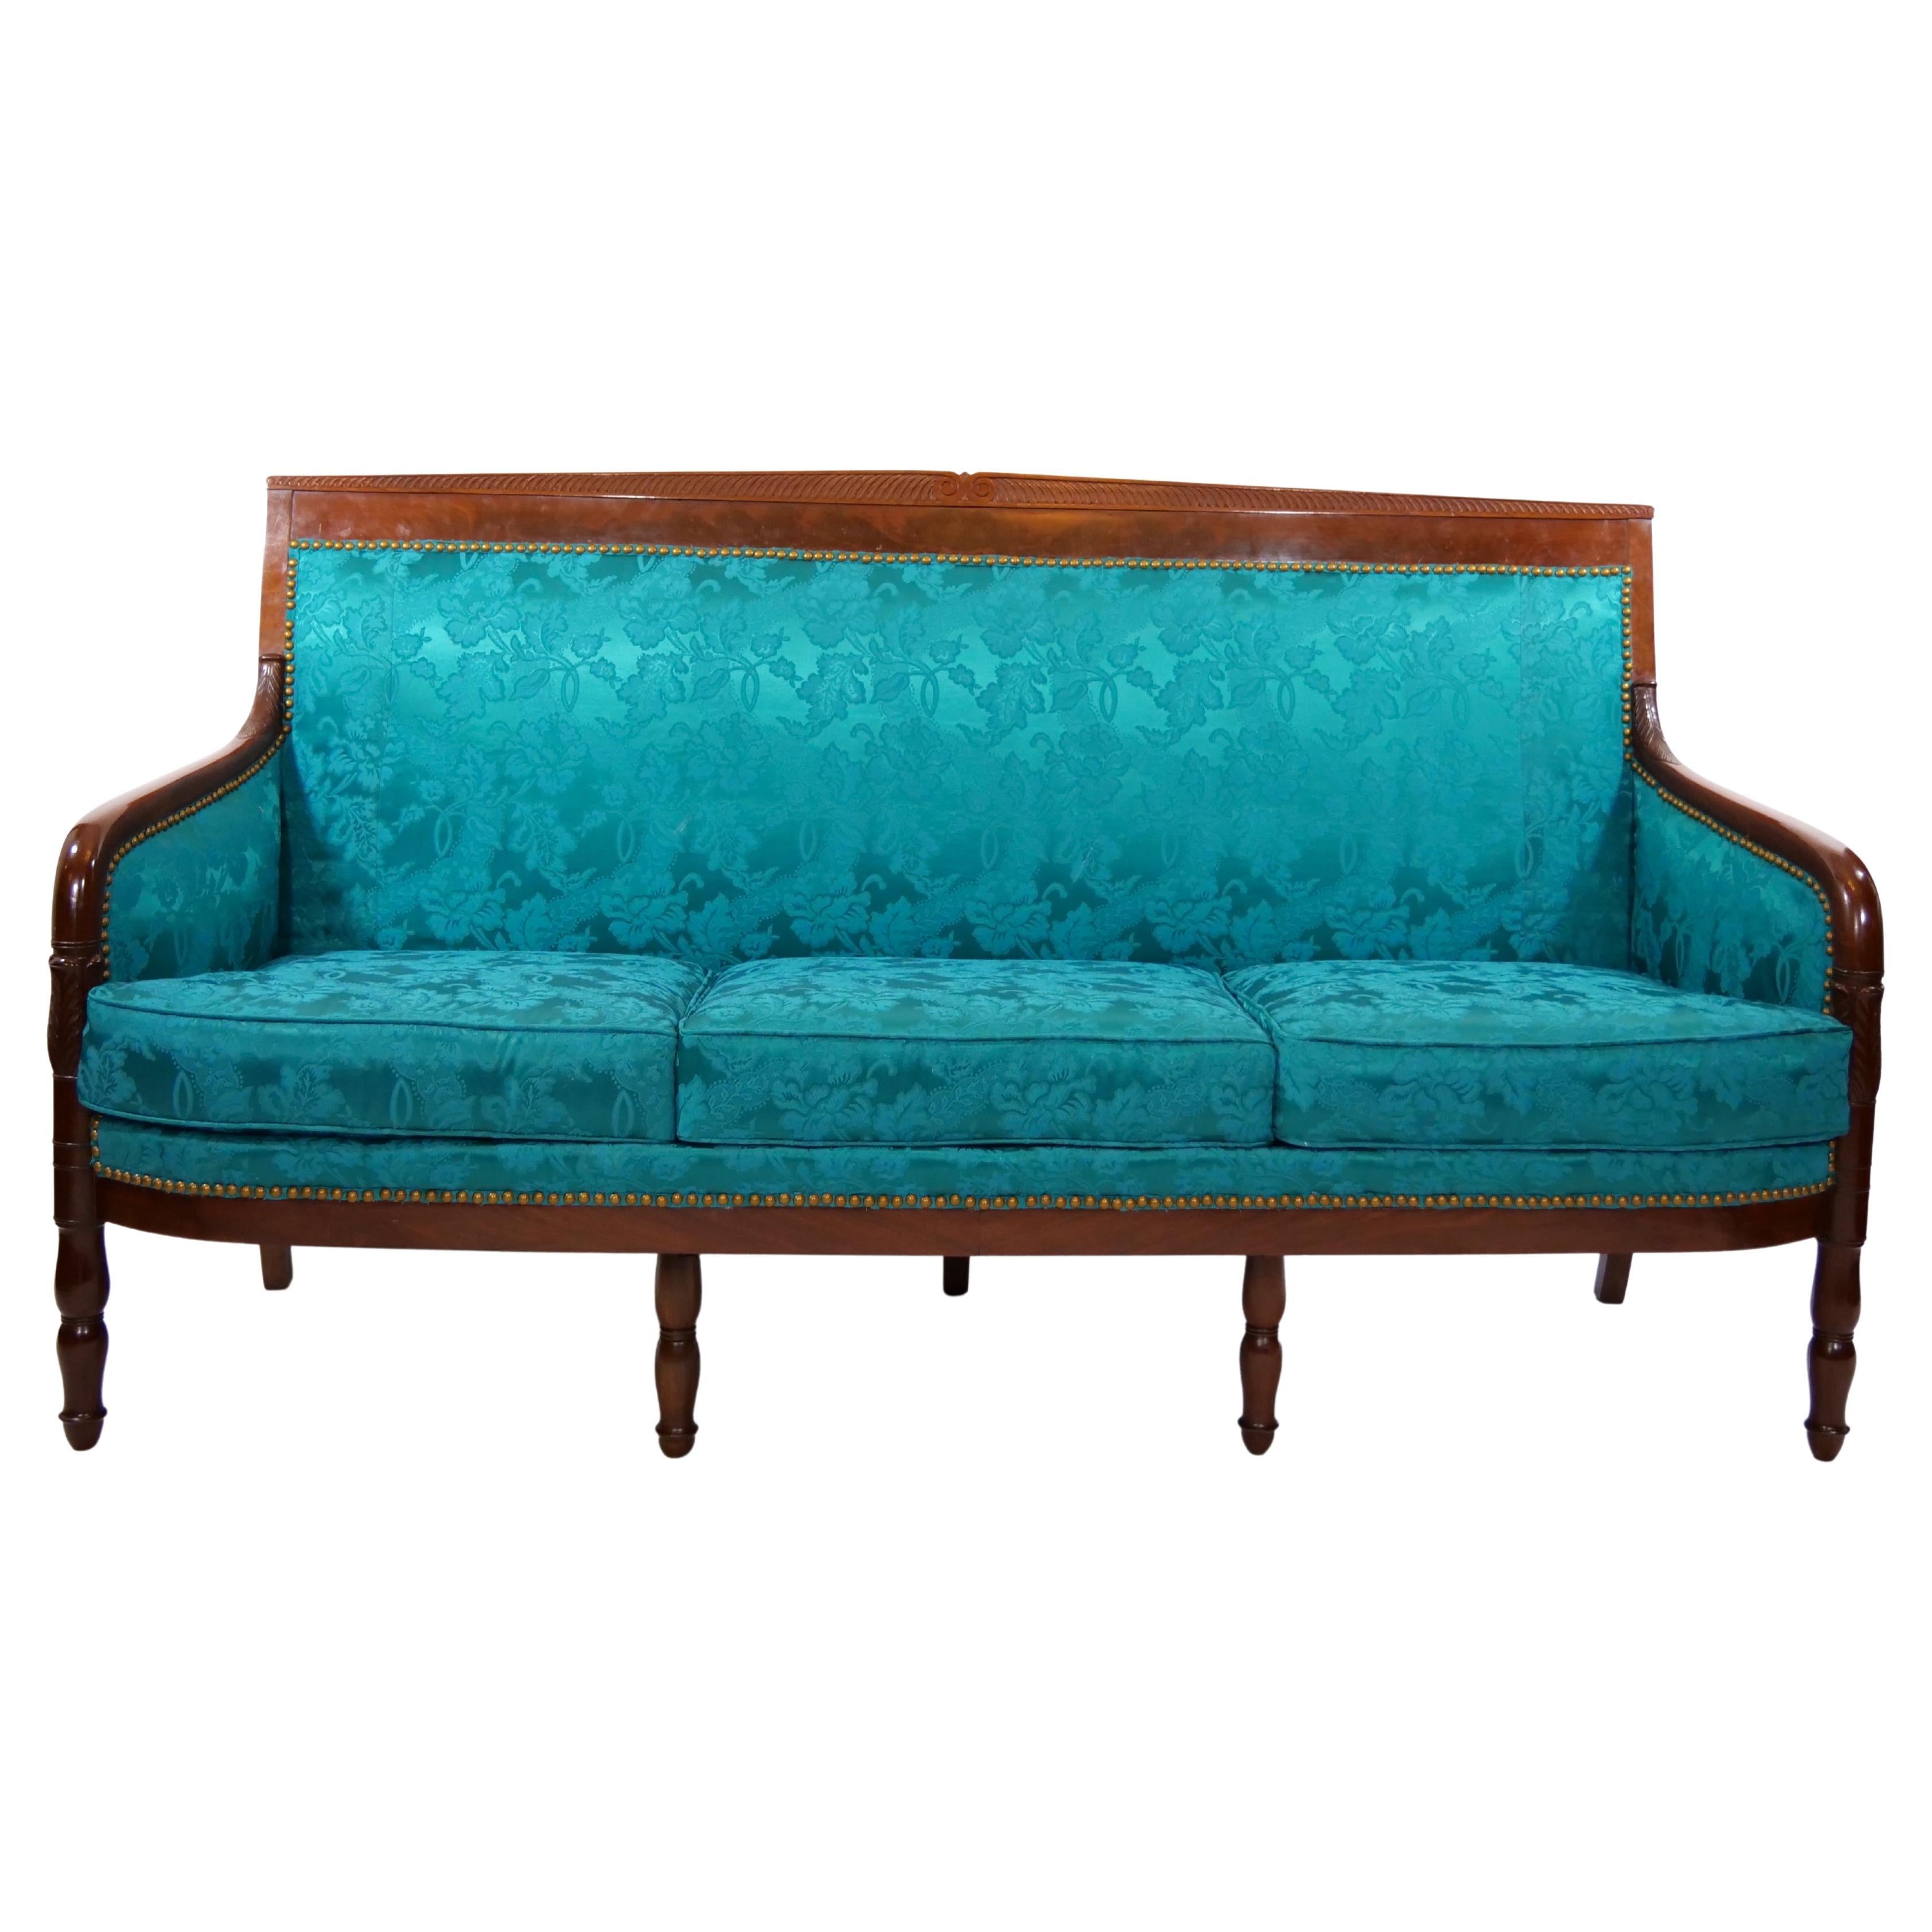 19th Century Mahogany Wood Framed / Upholstered Settee For Sale 4